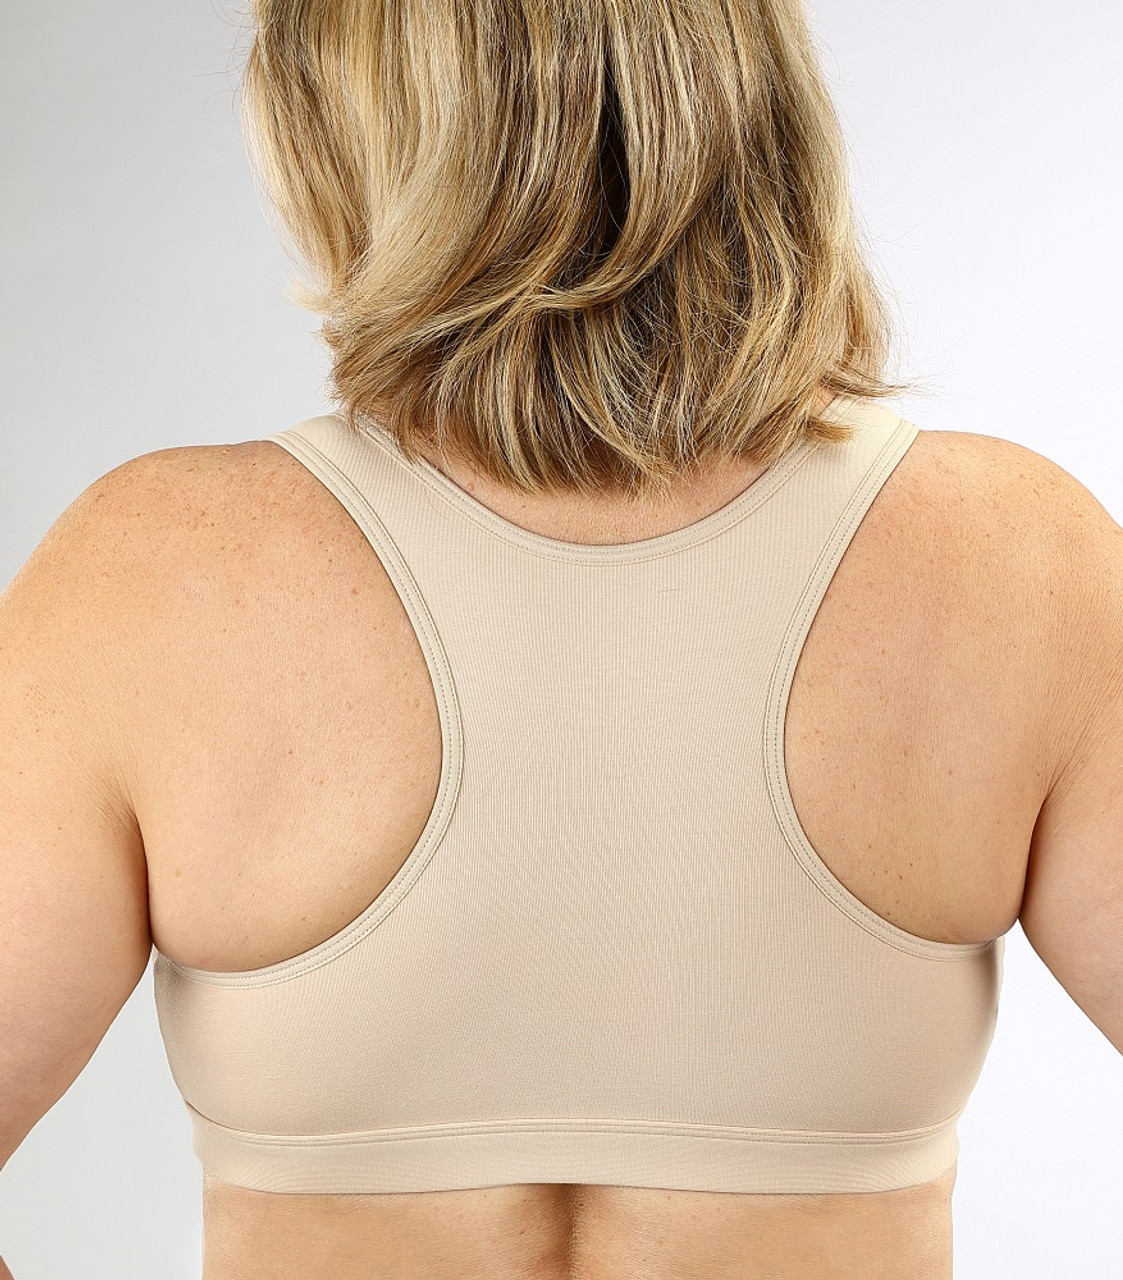 Front Closure- Seamless Cotton Bra with back support for sensitive